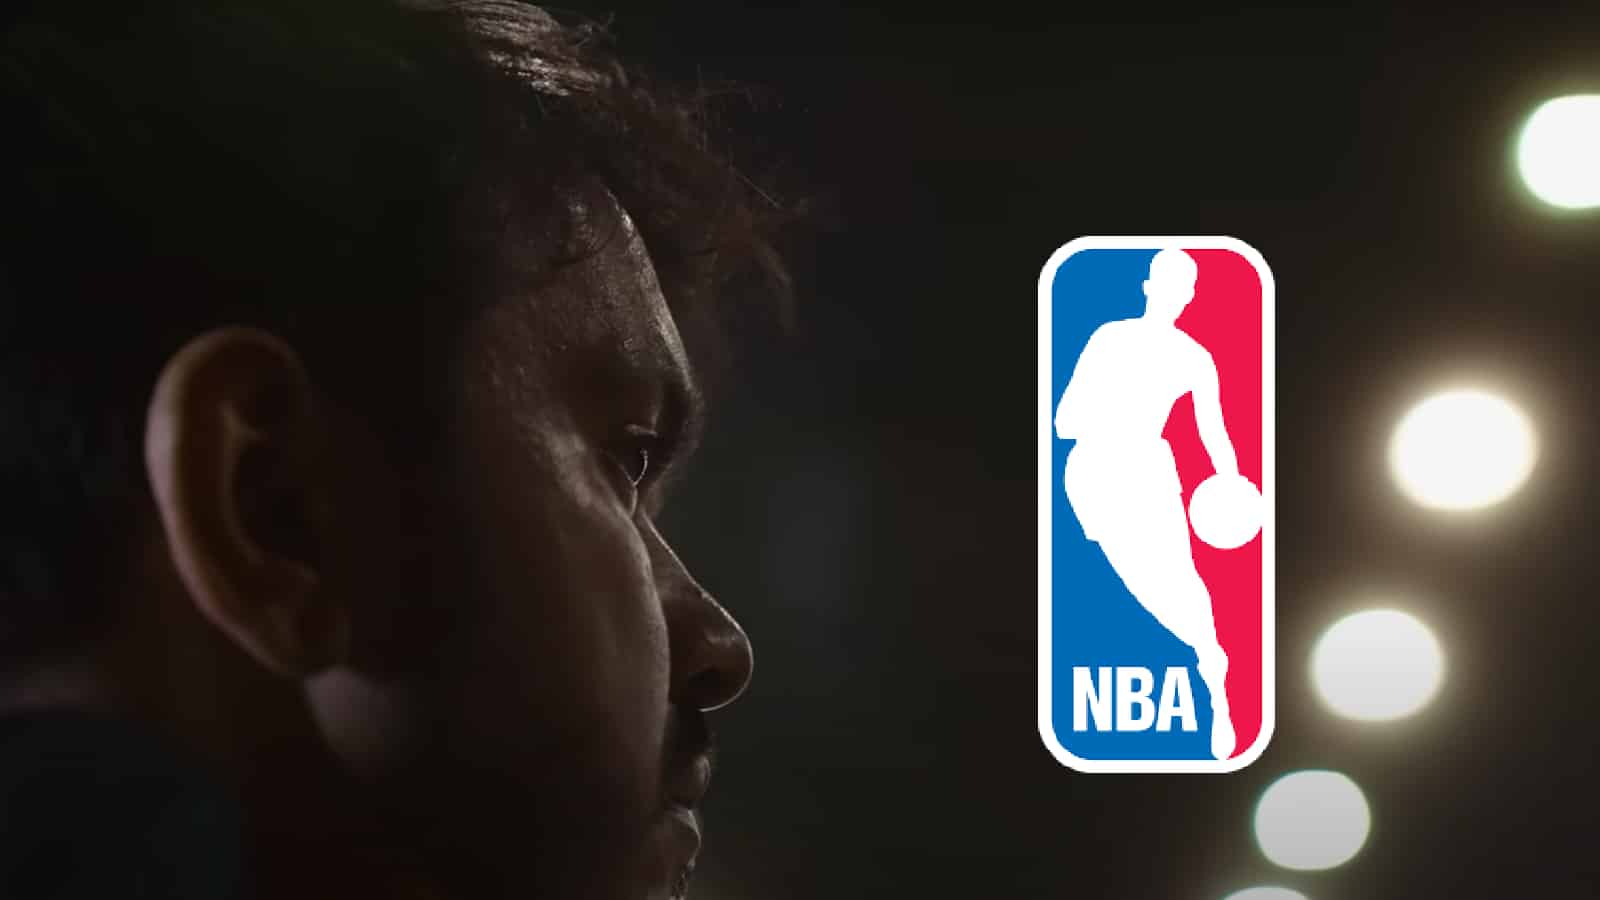 NBA games to be shown on Twitch by Brazilian streamer 'Gaules' - SportsPro